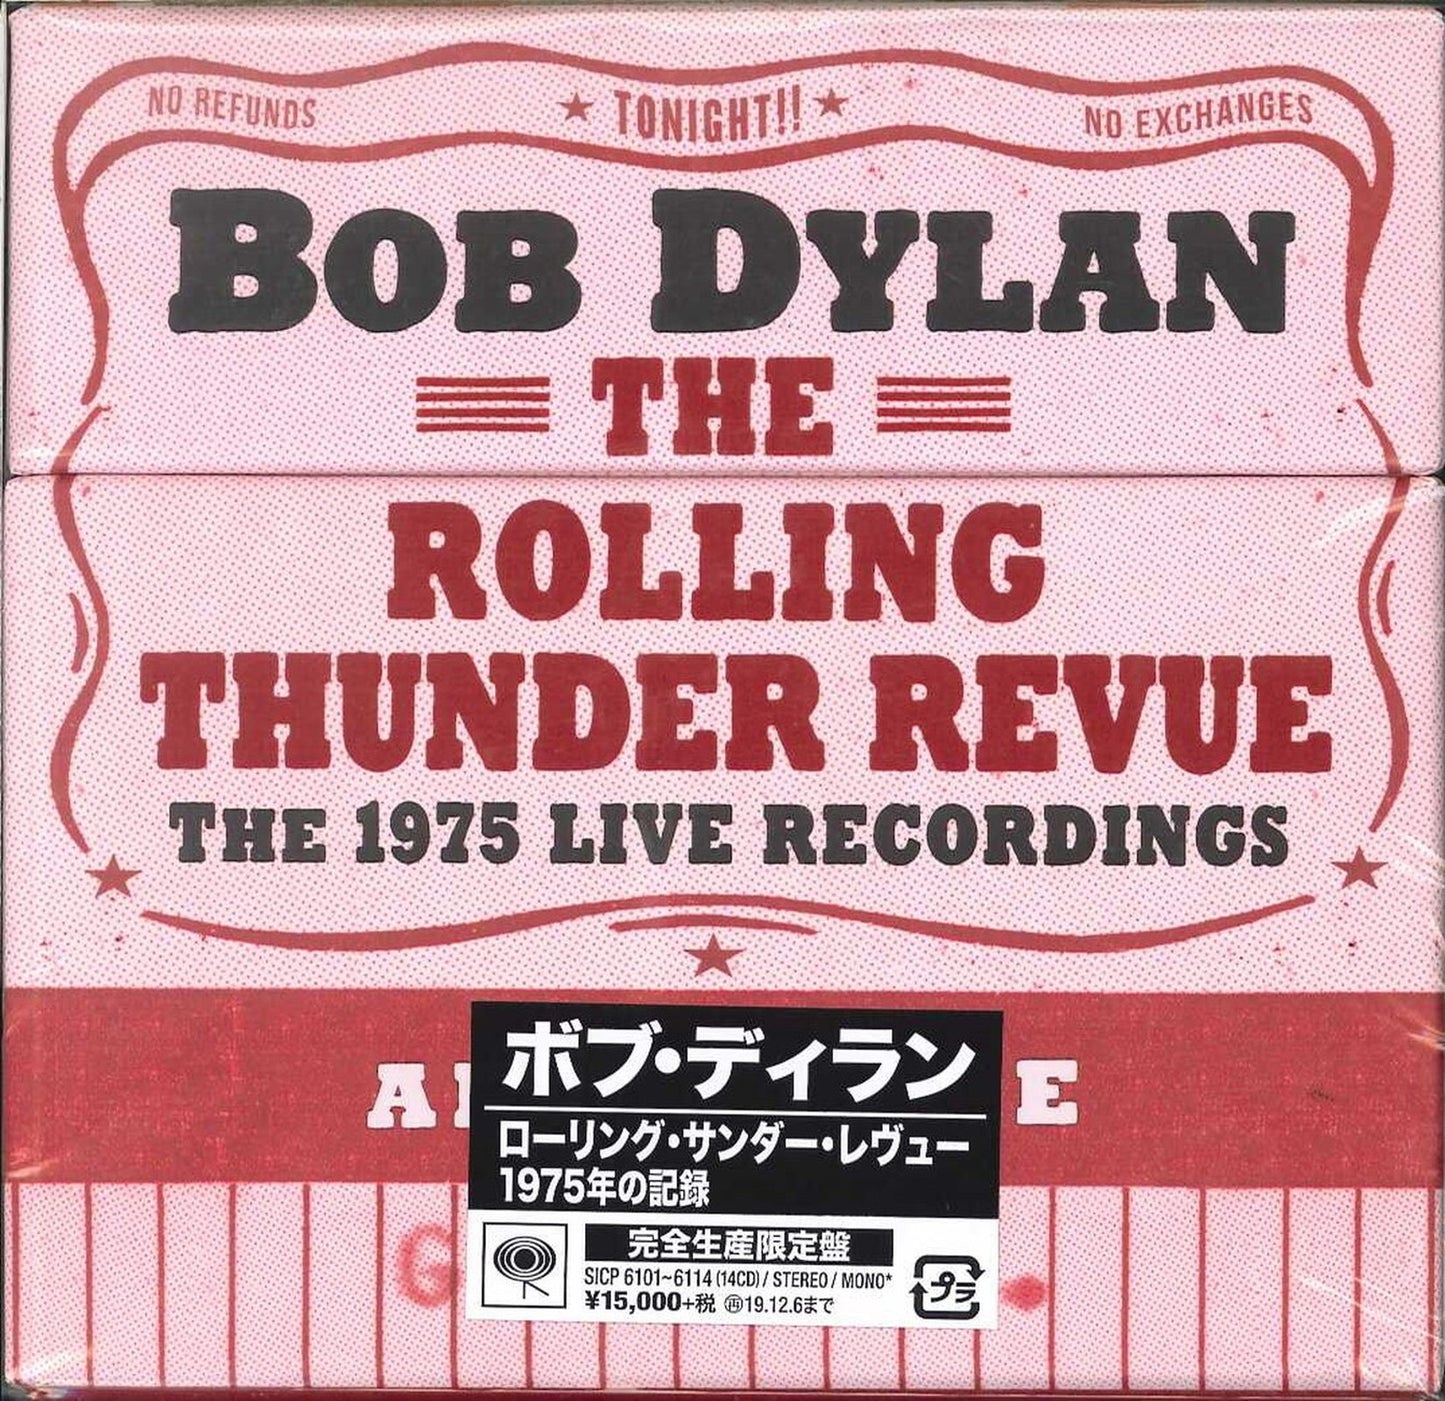 Bob Dylan - The Rolling Thunder Revue:The 1975 Live Recordings - 14 Import CD+Book Limited Edition